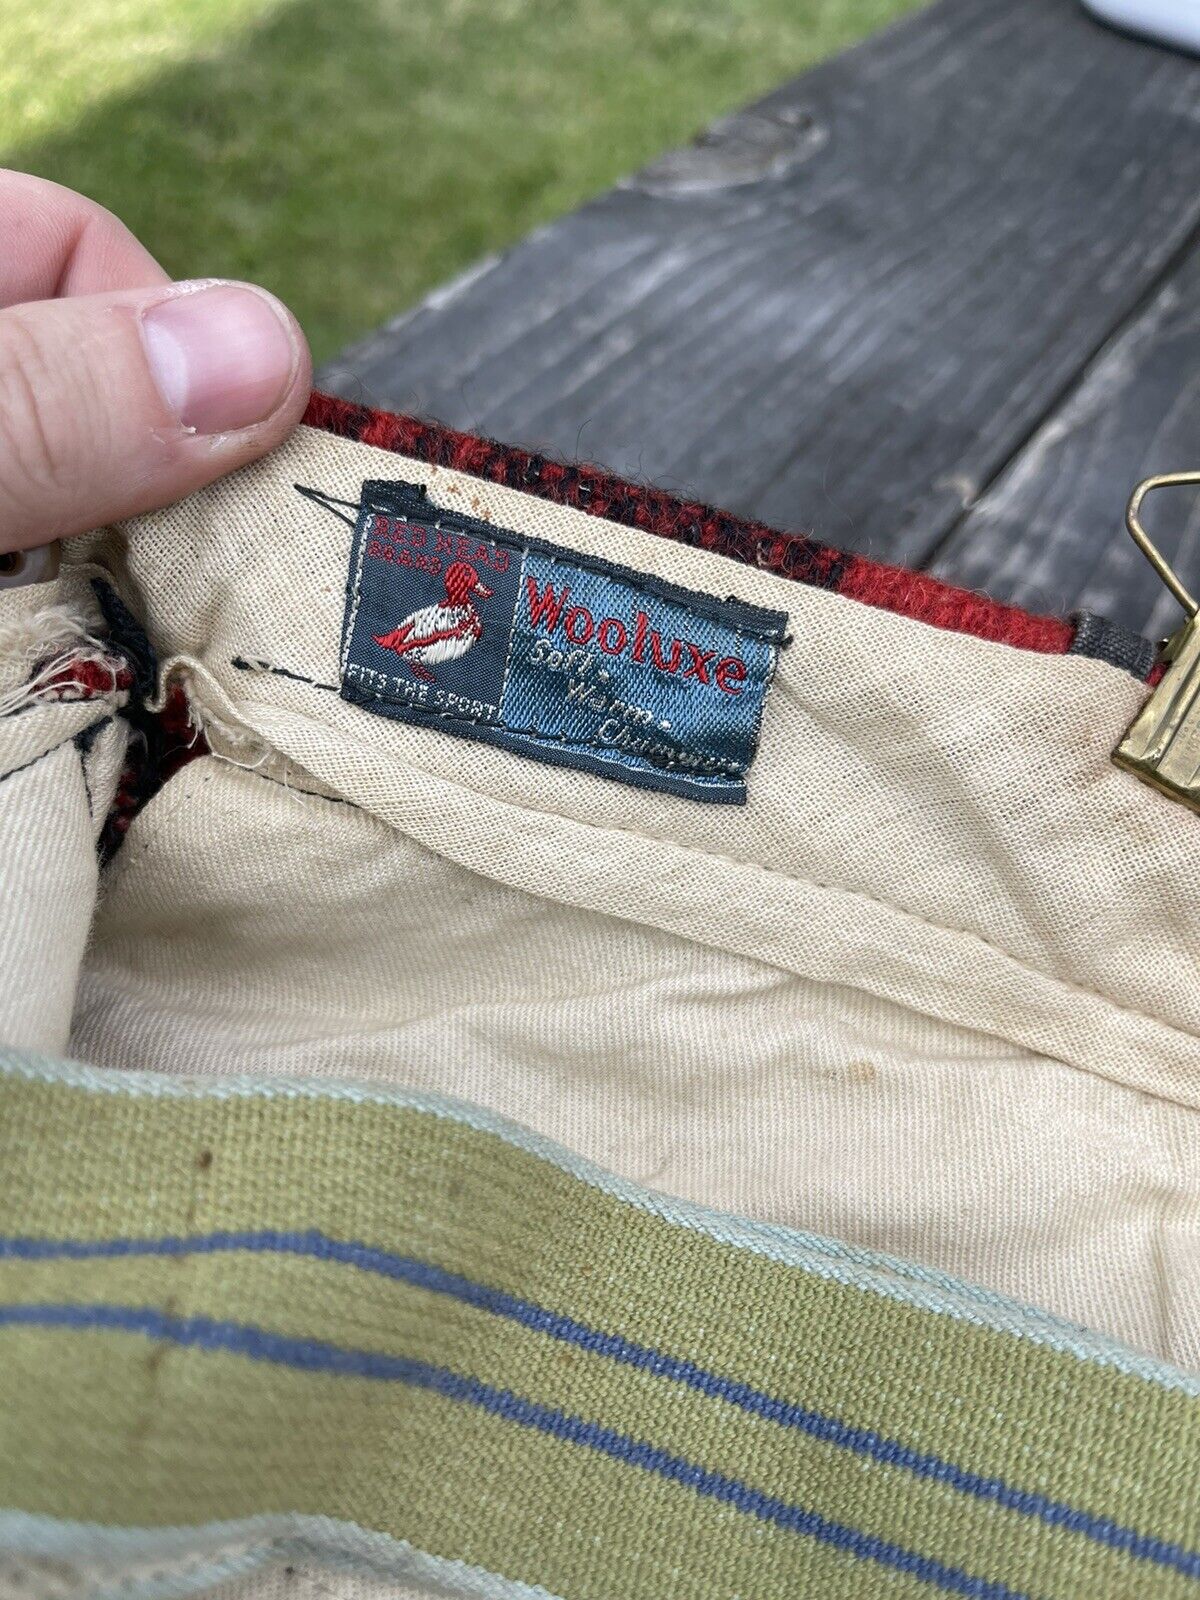 vintage Wooluxe red head brand hunting pants Size 34